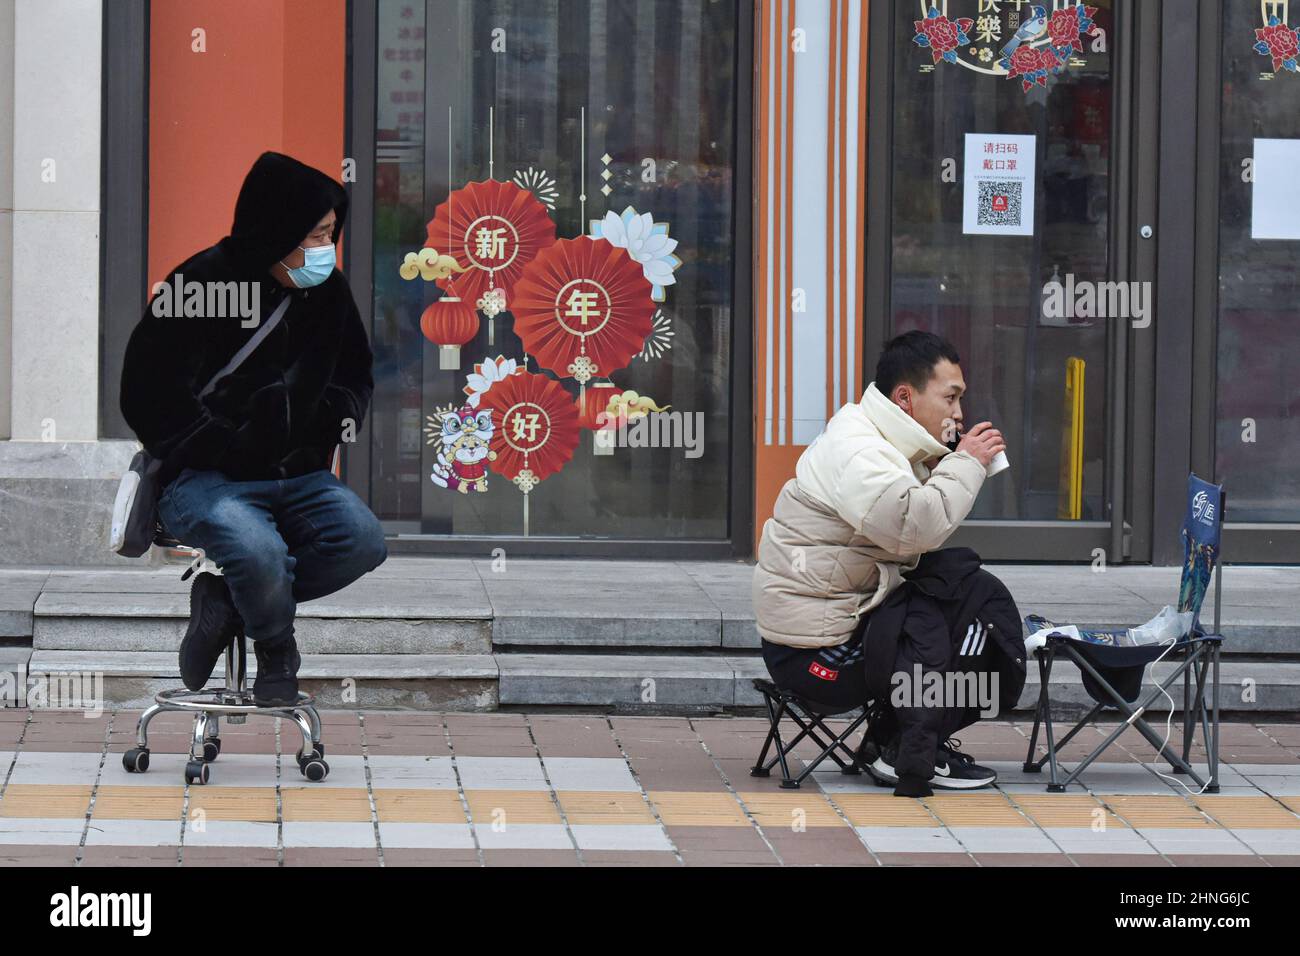 A customer sitting on low chair takes hot water while queuing up to buy 'Bing Dwen Dwen'. Every day since the opening of the Beijing Winter Olympics, people have lined up outside the licensed store on Beijing's Wangfujing Street to buy toys featuring the games' mascot, Bing Dwen Dwen, which have become a sought-after item in China. Stock Photo